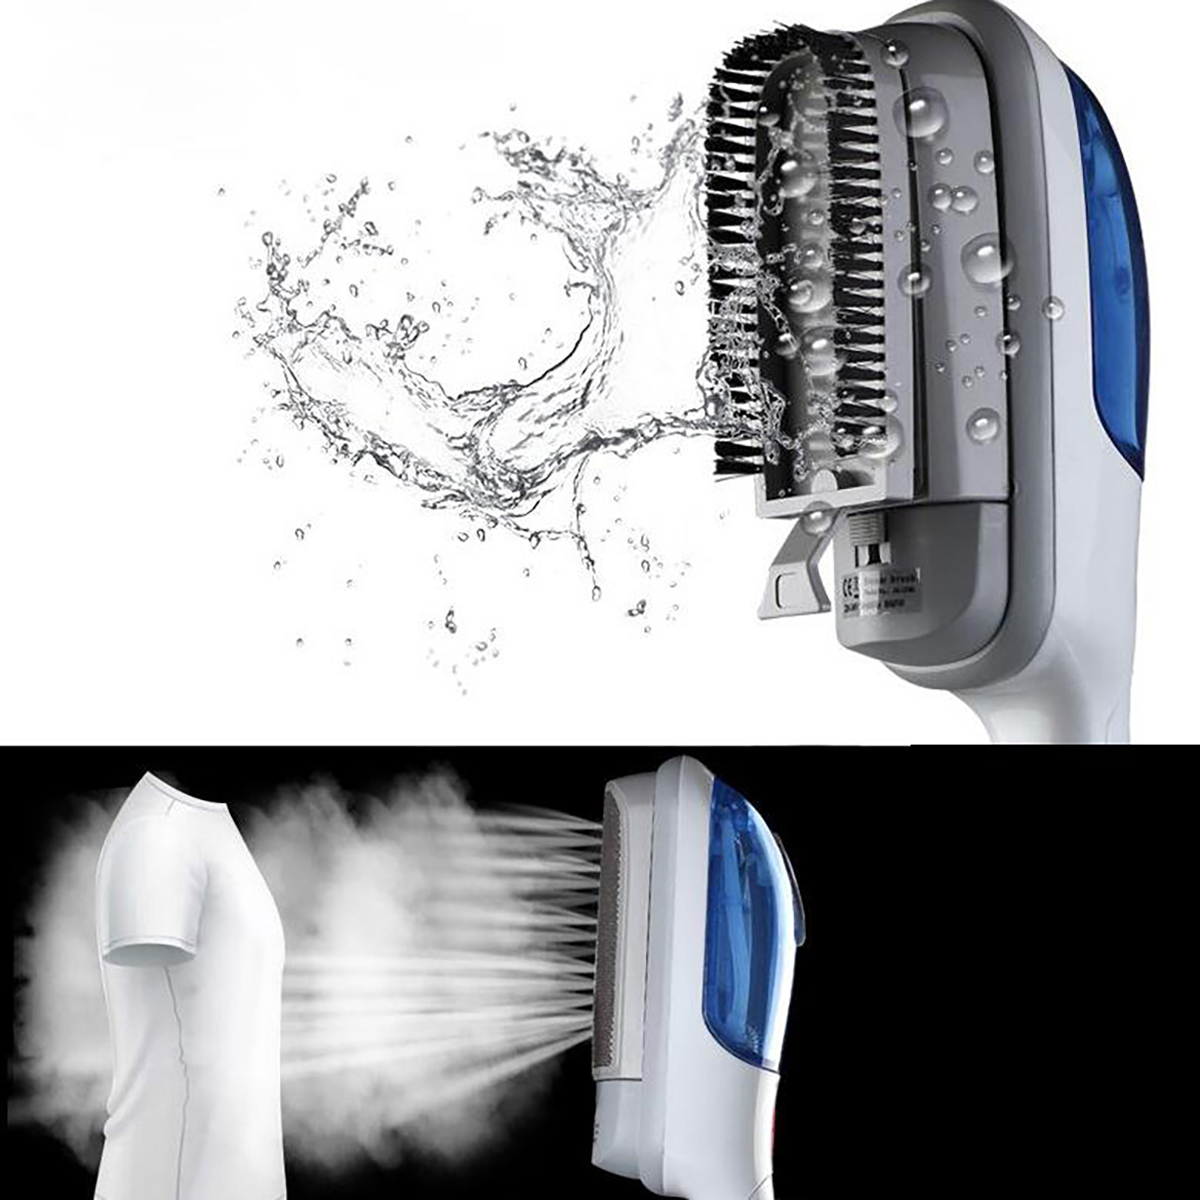 800W-Mini-Handheld-Steamer-Steam-Iron-Electric-Clothes-Dry-Portable-Vertical-Steam-Outdoor-Travel-EU-1810023-4